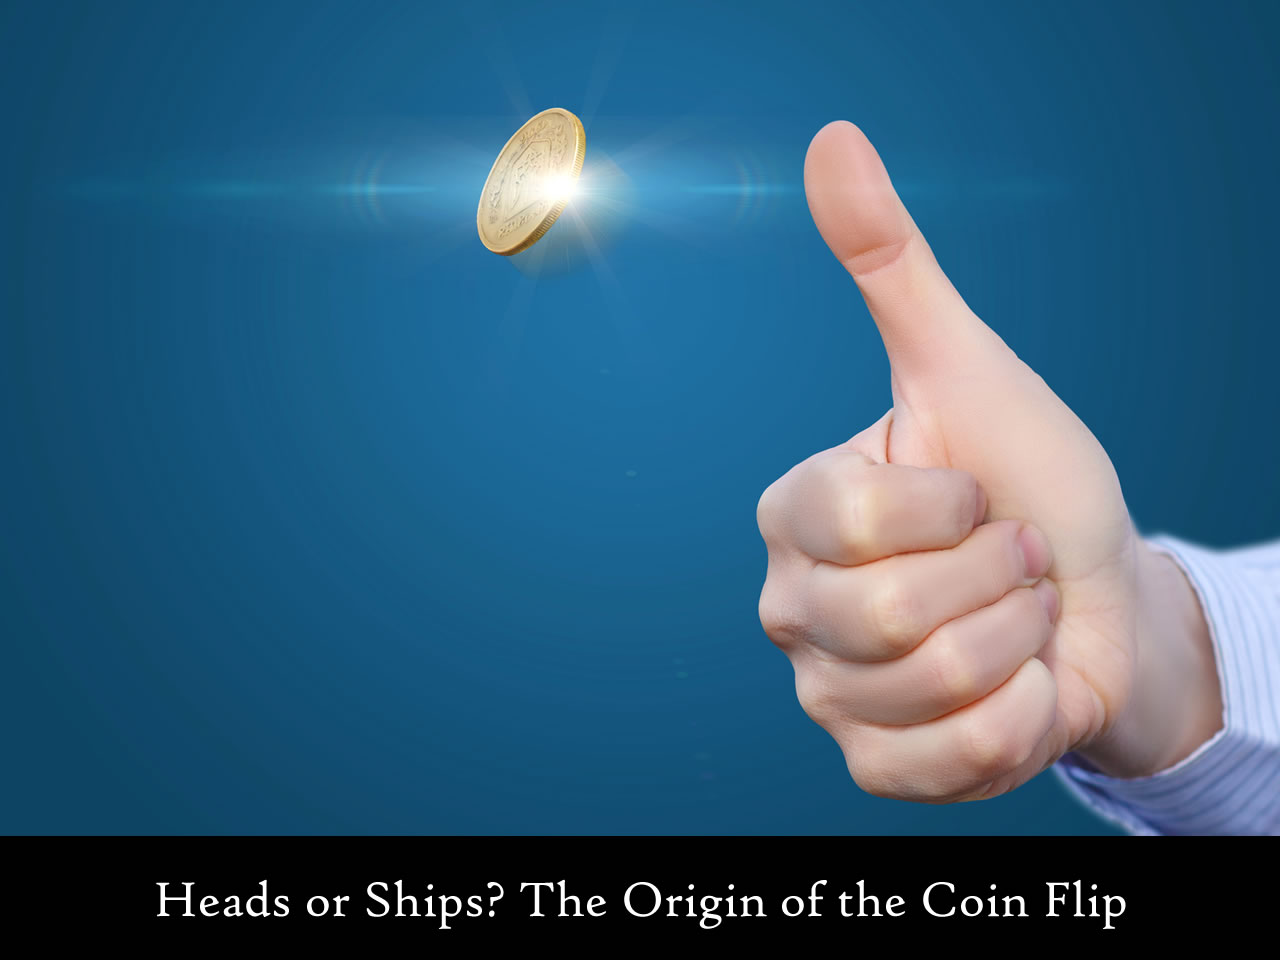 Heads or Ships? The Origin of the Coin Flip